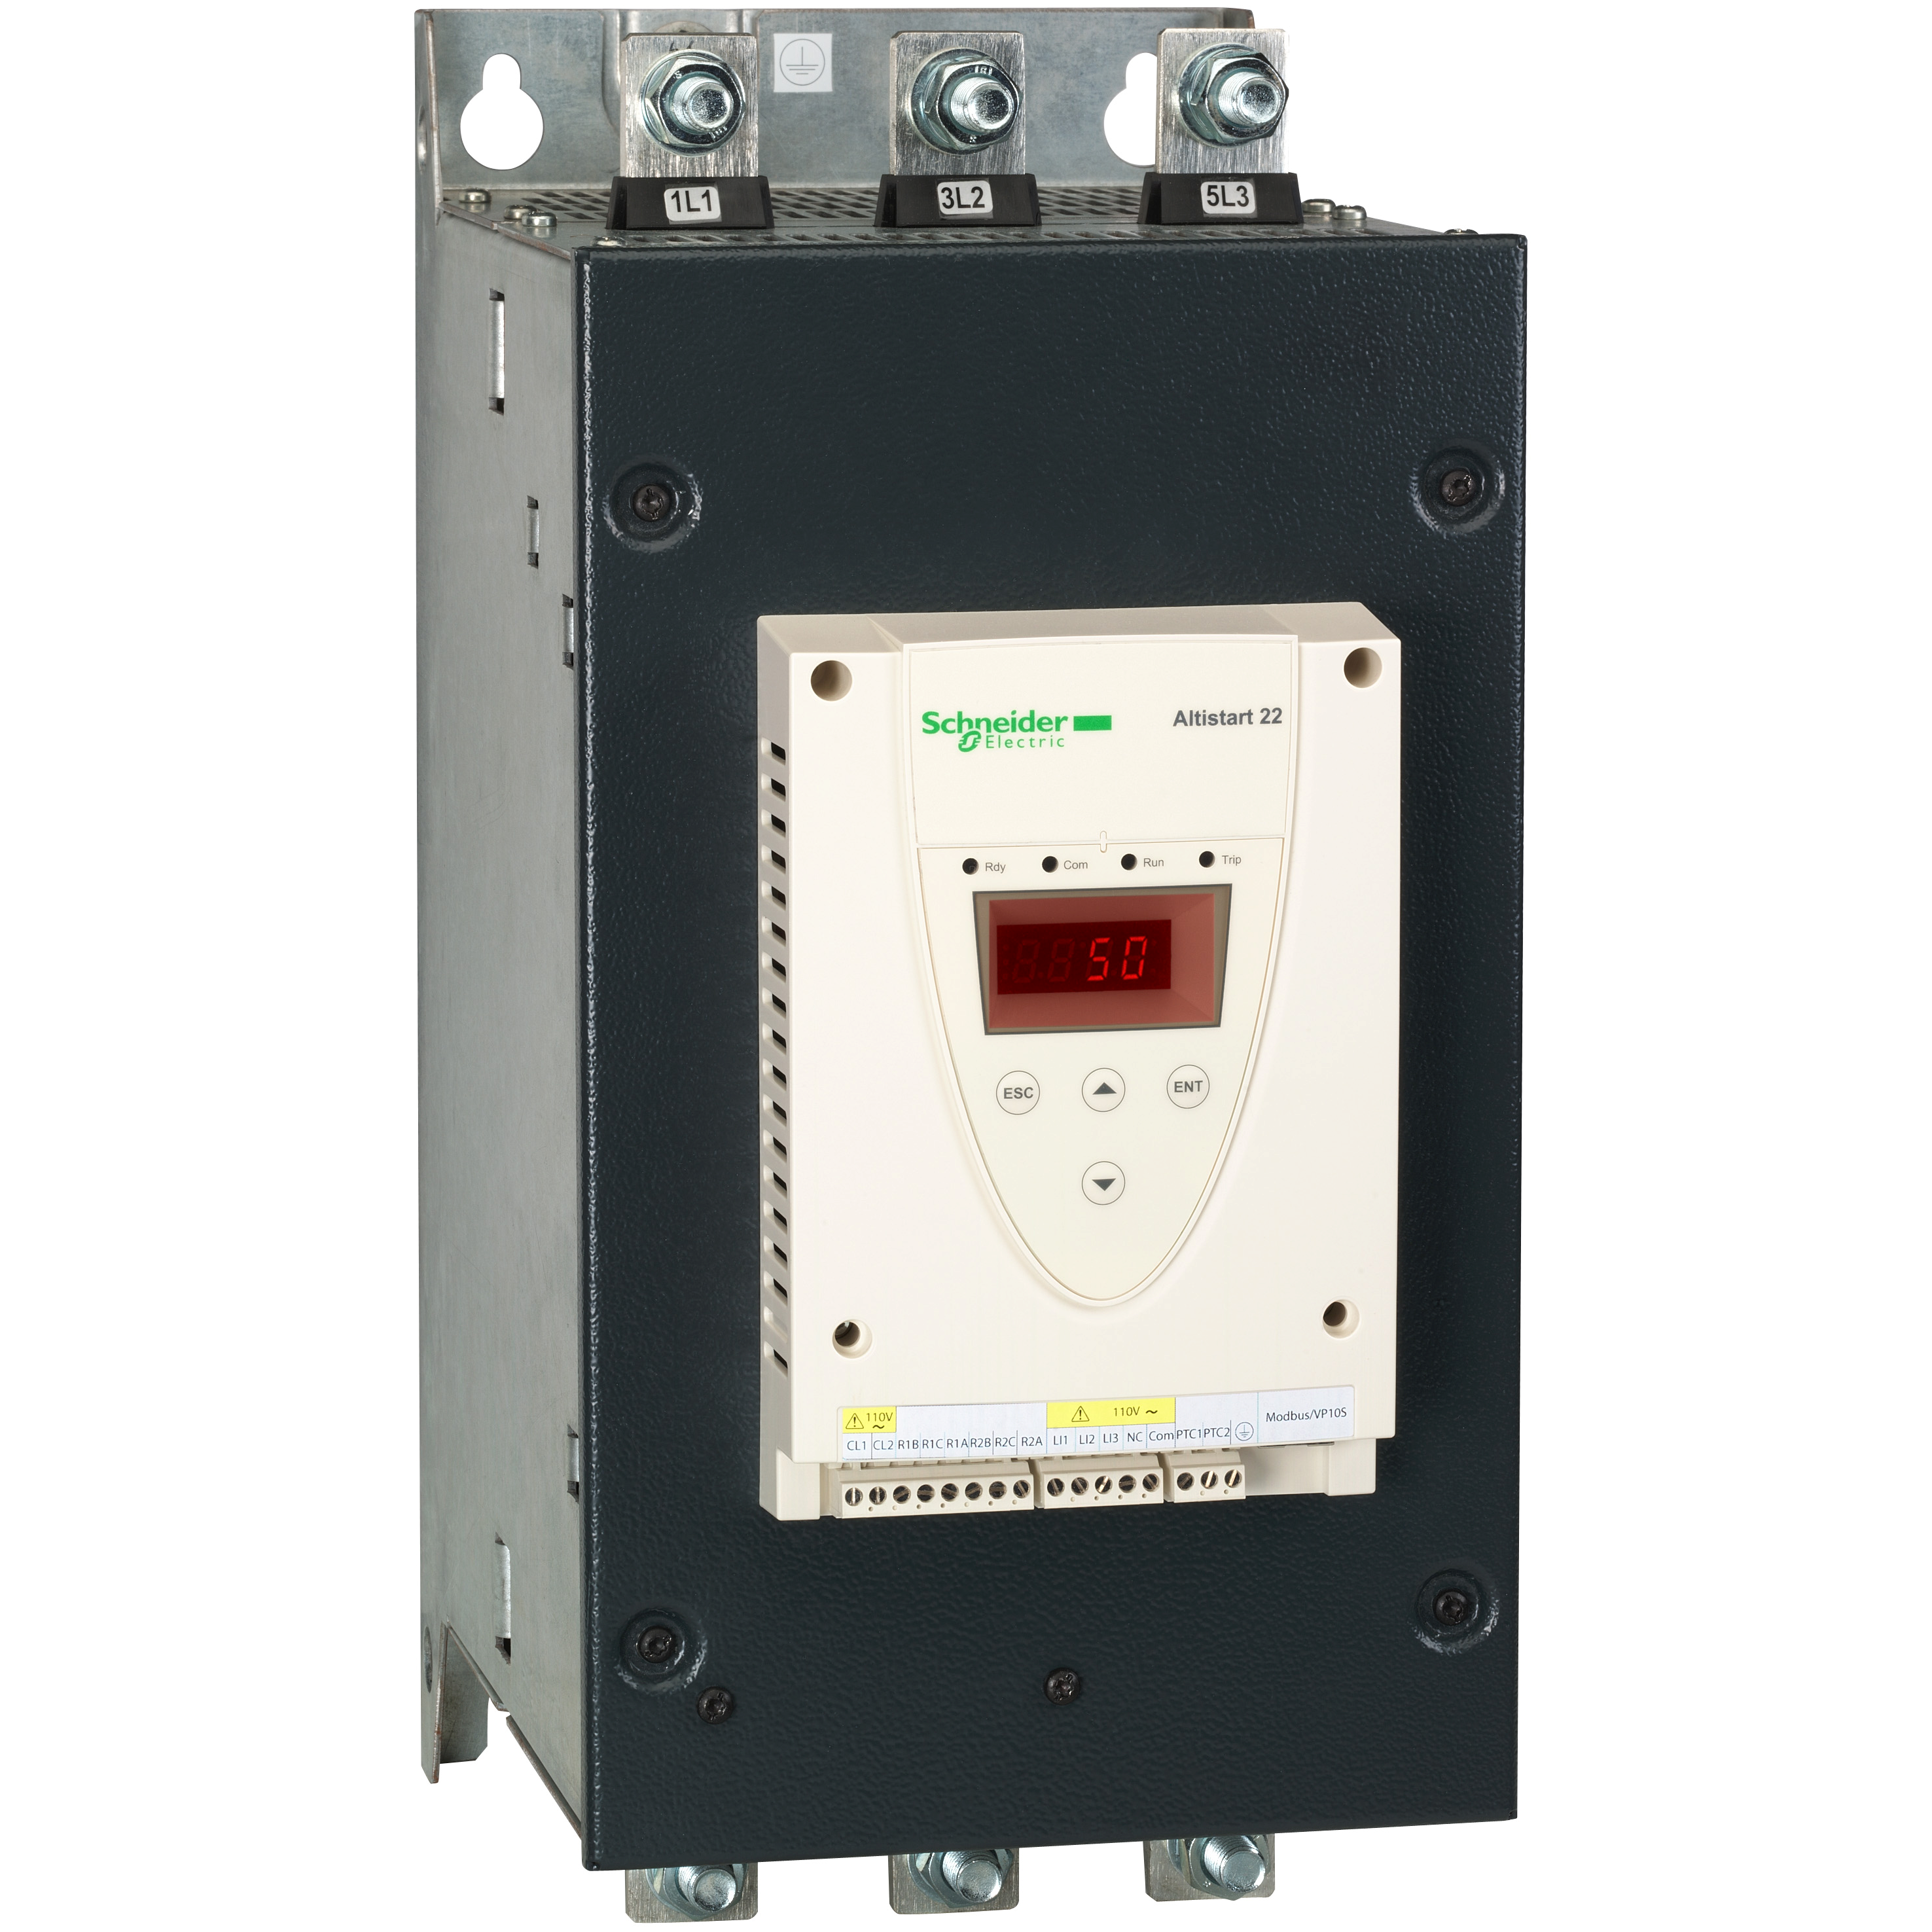 Soft start/soft stop, P=160kW, Uc=400V AC, In=320A